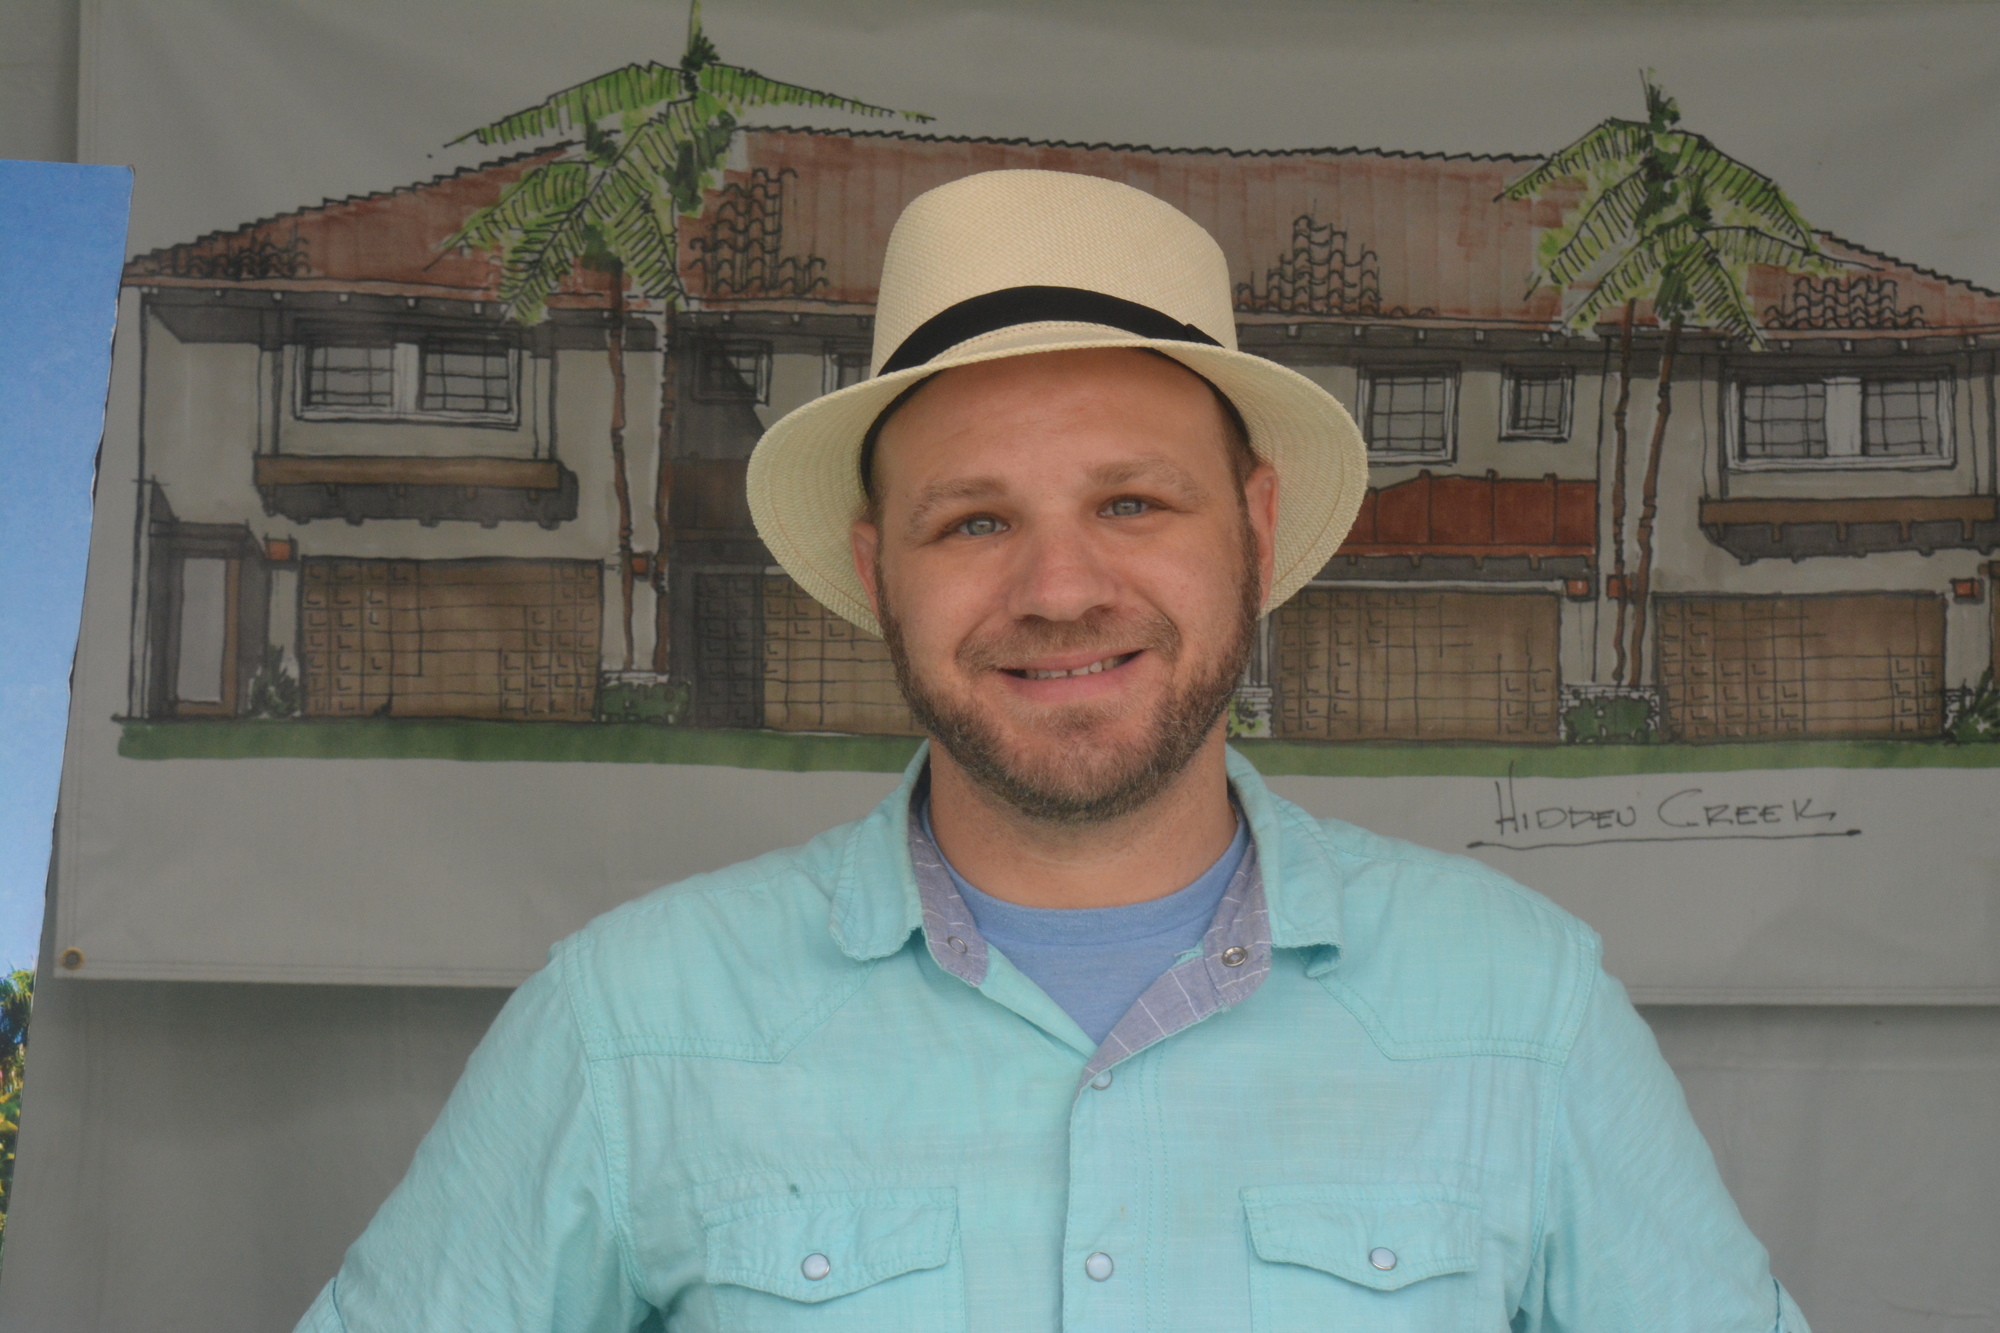 Craig Hirschberger is the sales manager for Hidden Creek Townhomes at Lakewood Ranch.